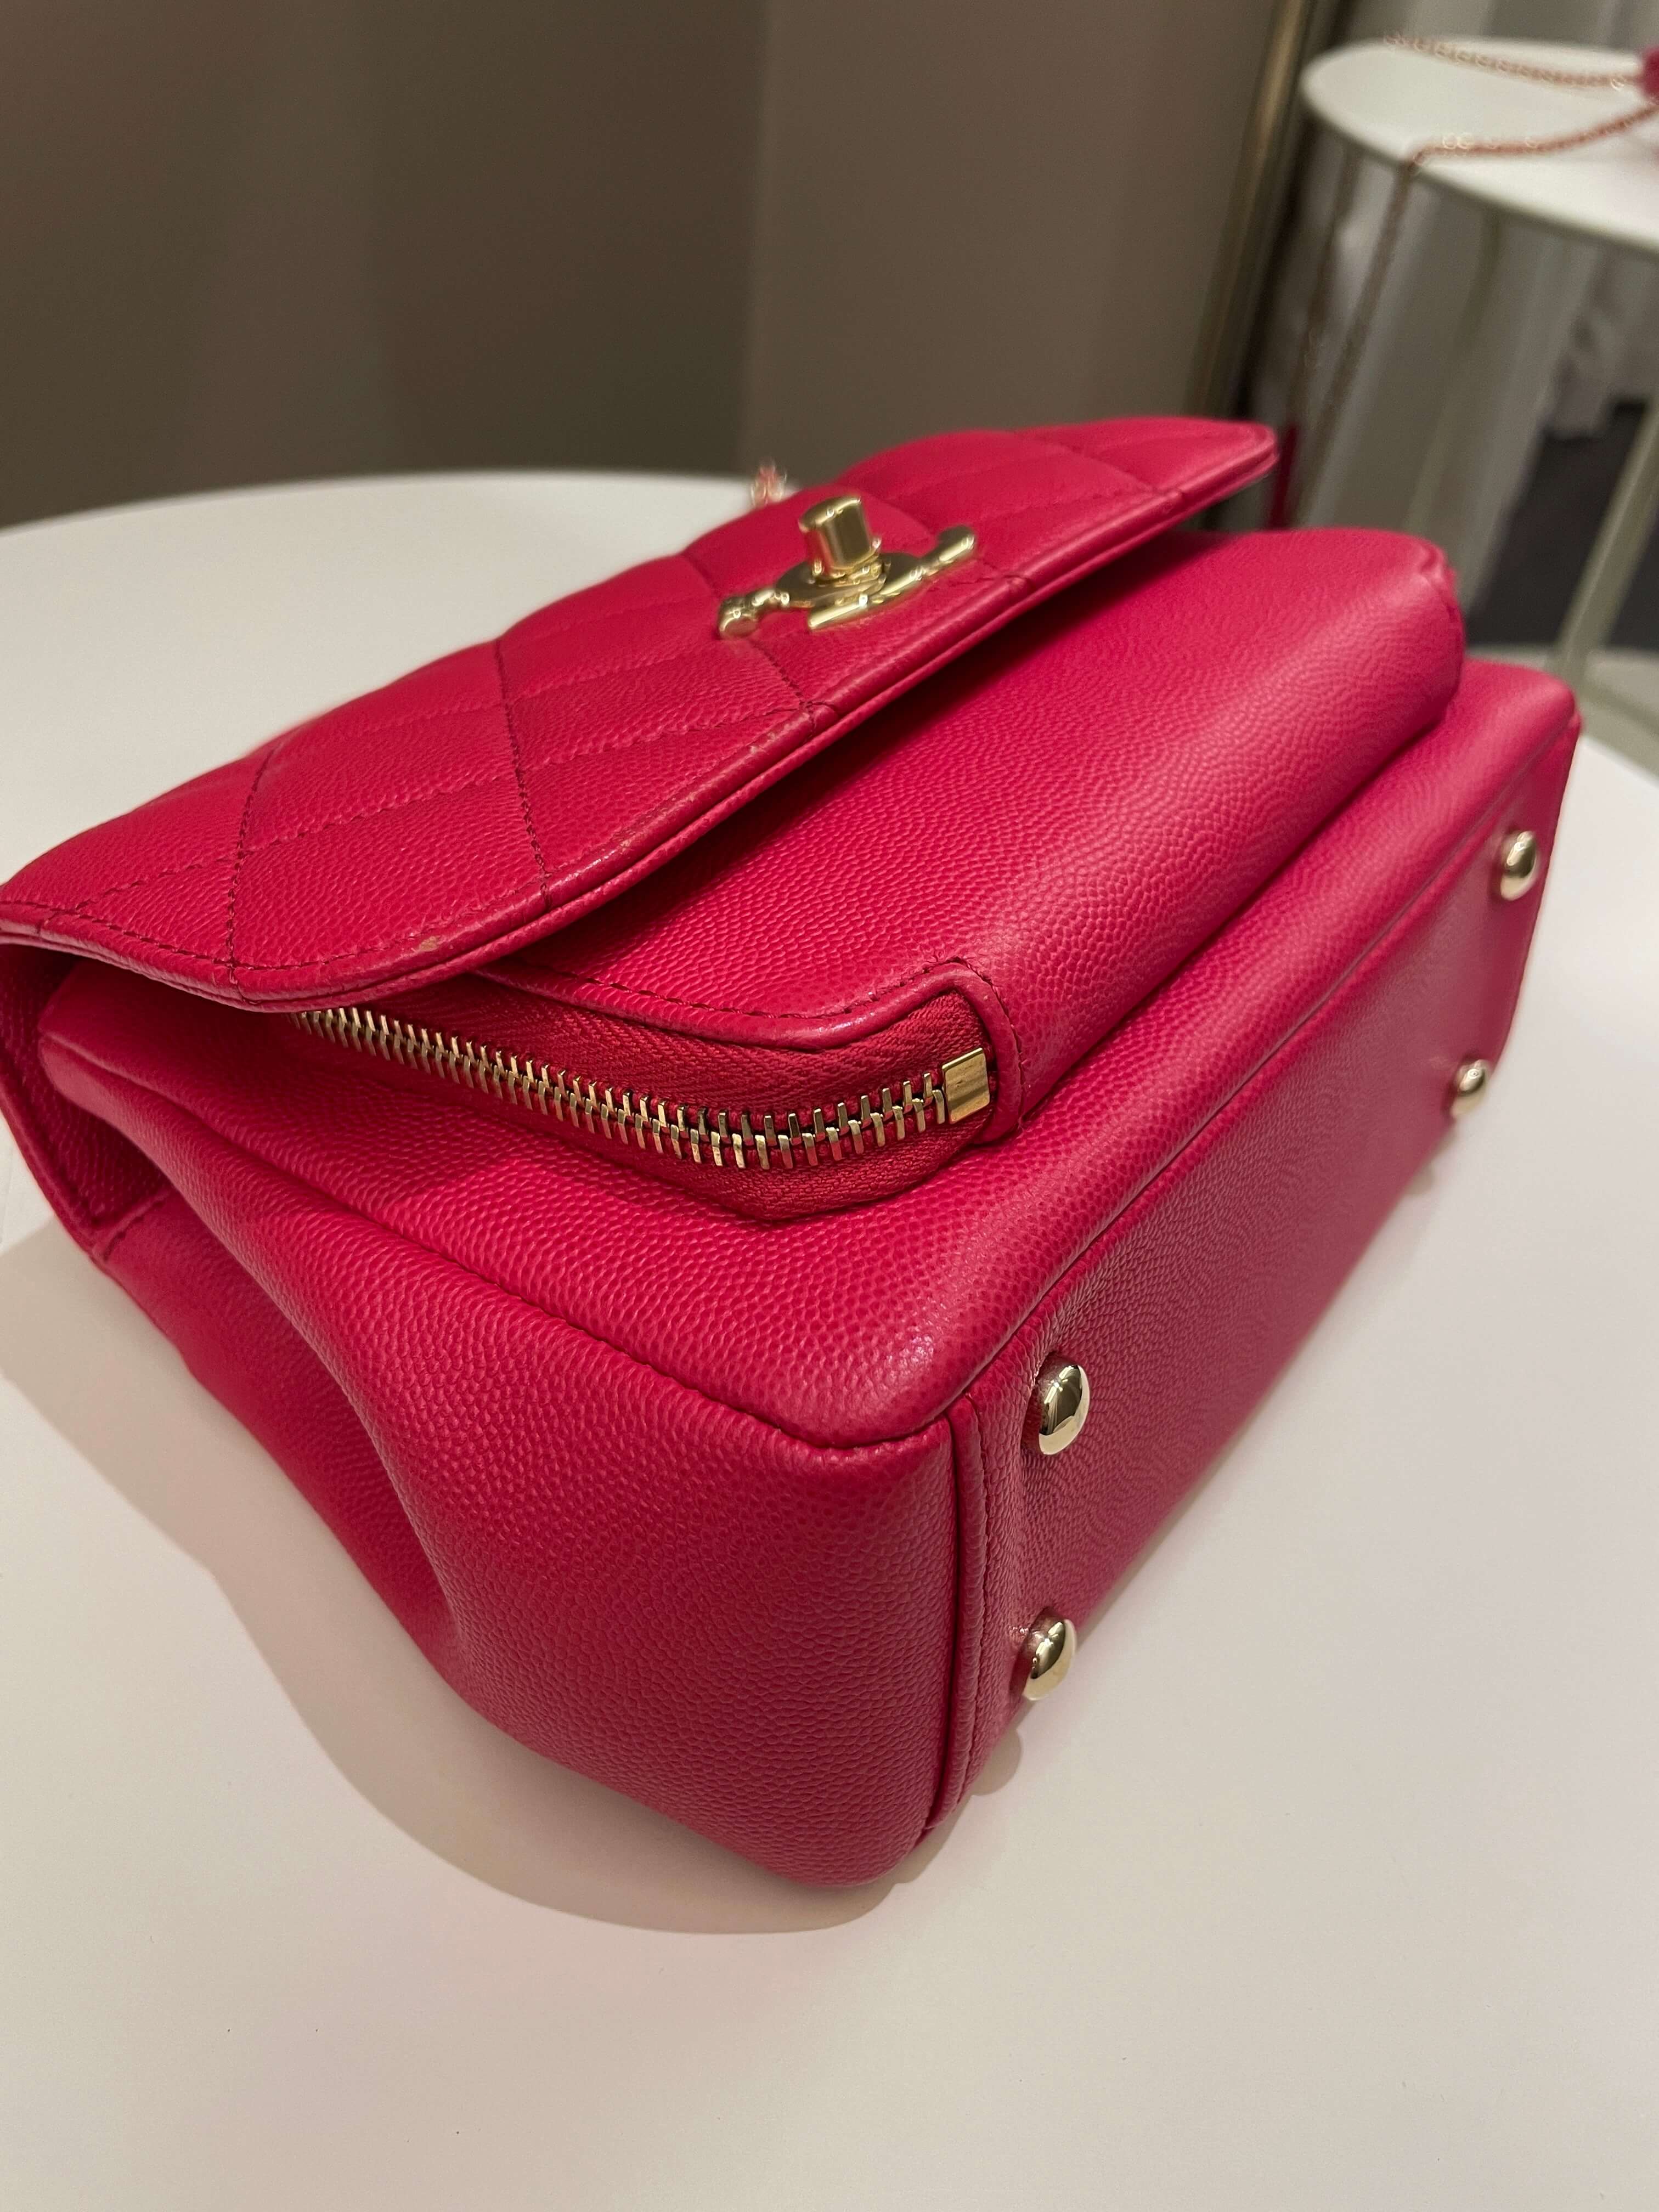 Chanel Business Affinity Flap Red Caviar